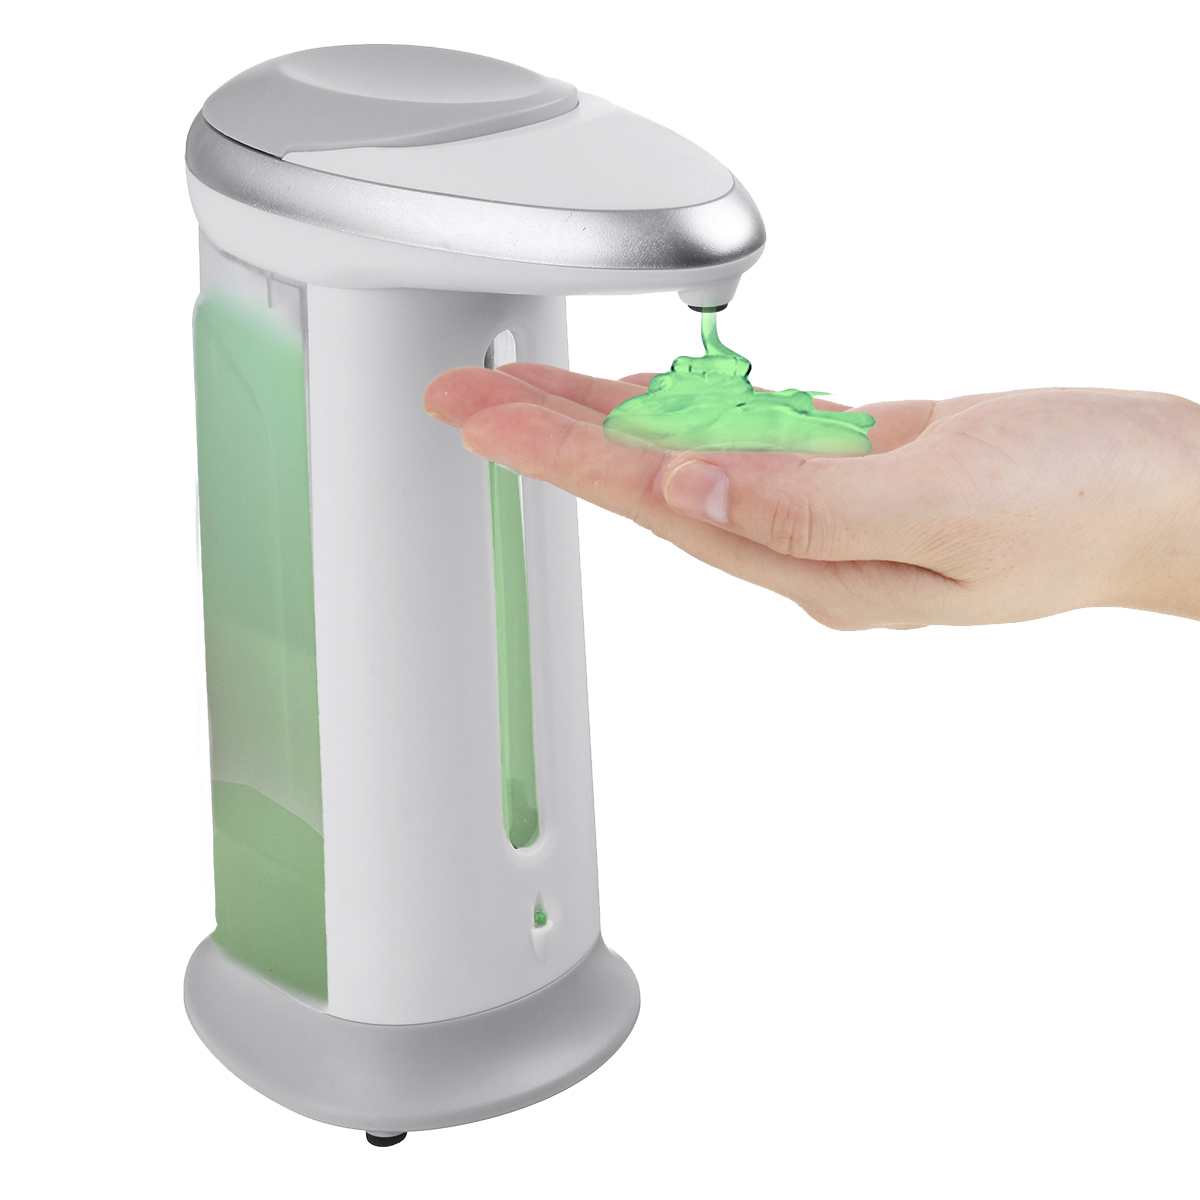 Soap-Dispenser-Automatic-Lotion-Dispenser-Infrared-Sensor-Automatic-No-Touch-1690580-3